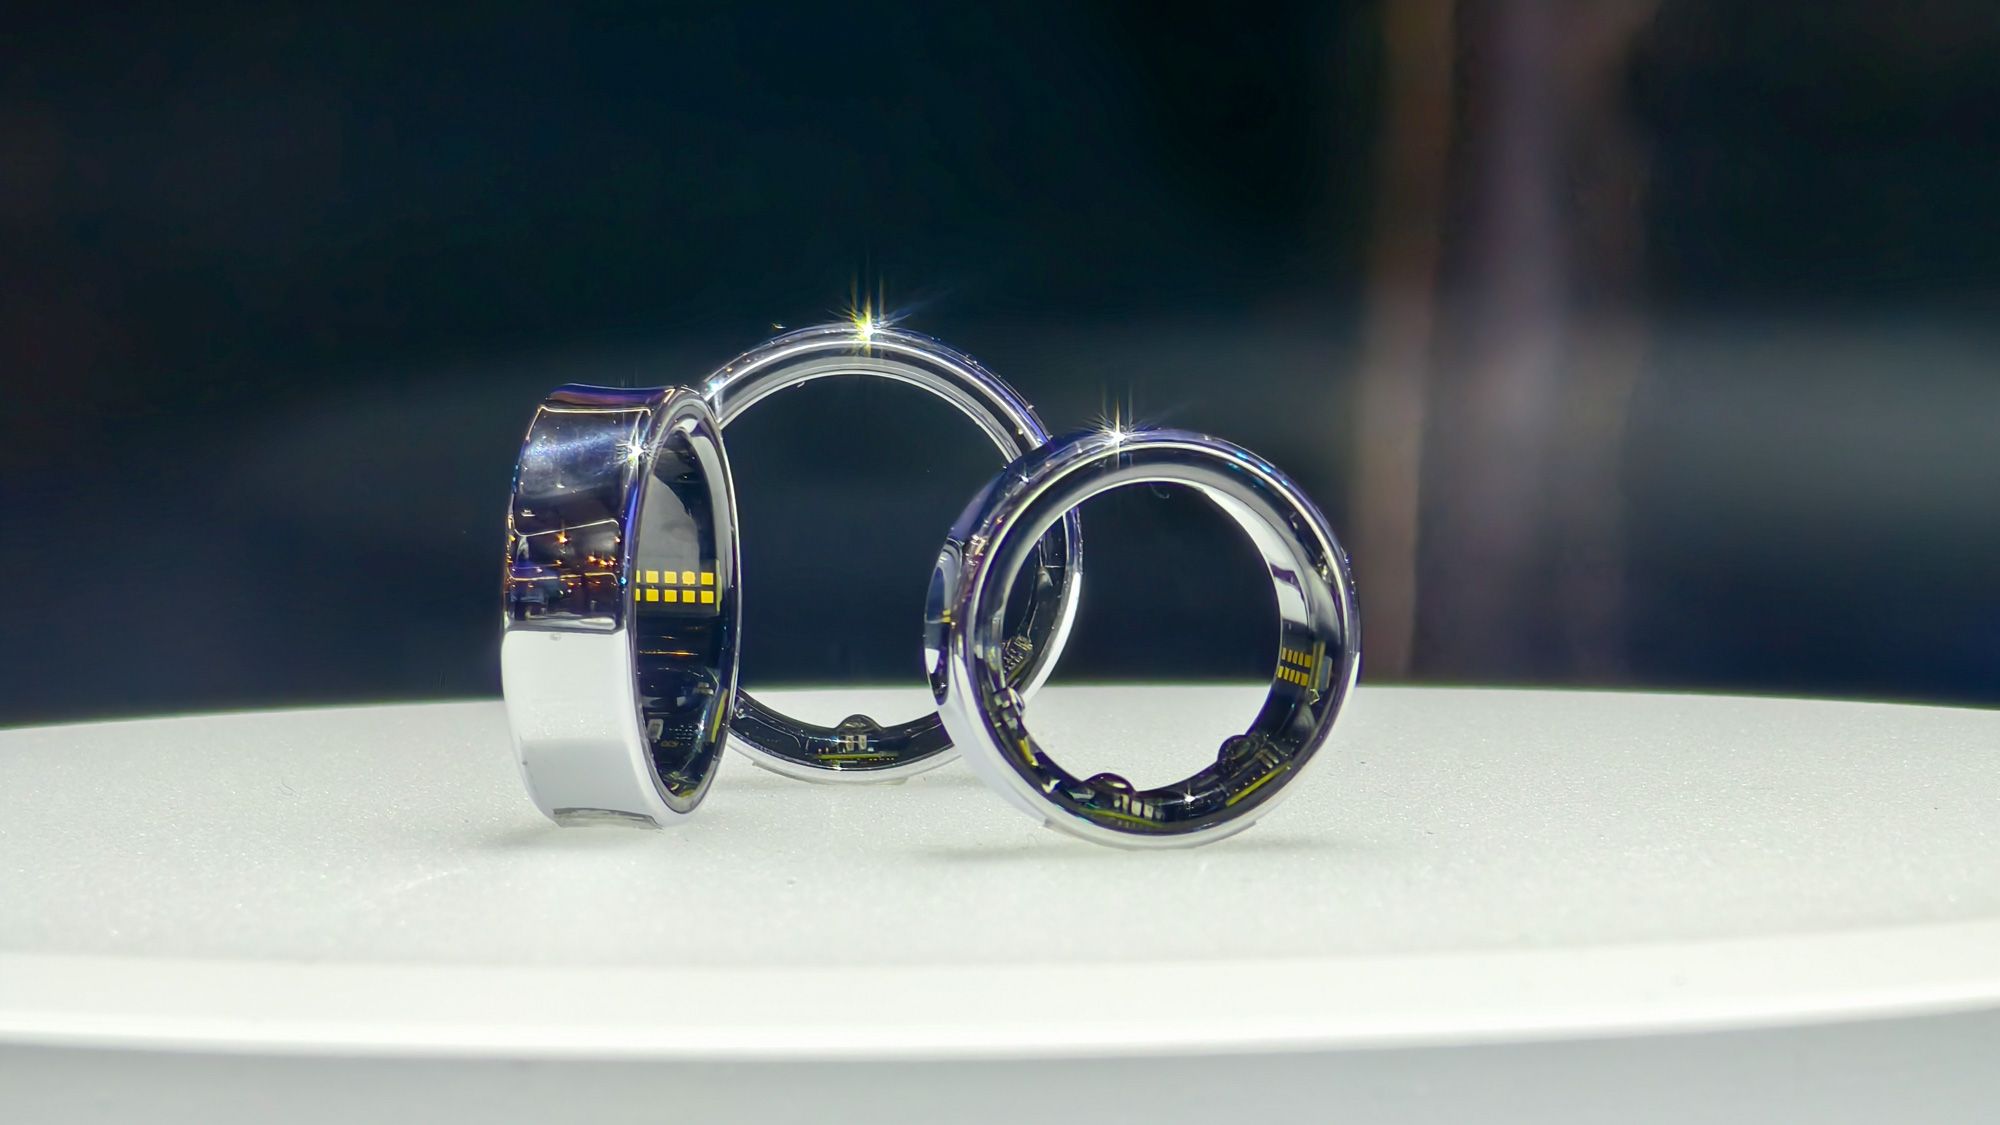 7 new things we've learned about the Samsung Galaxy Ring